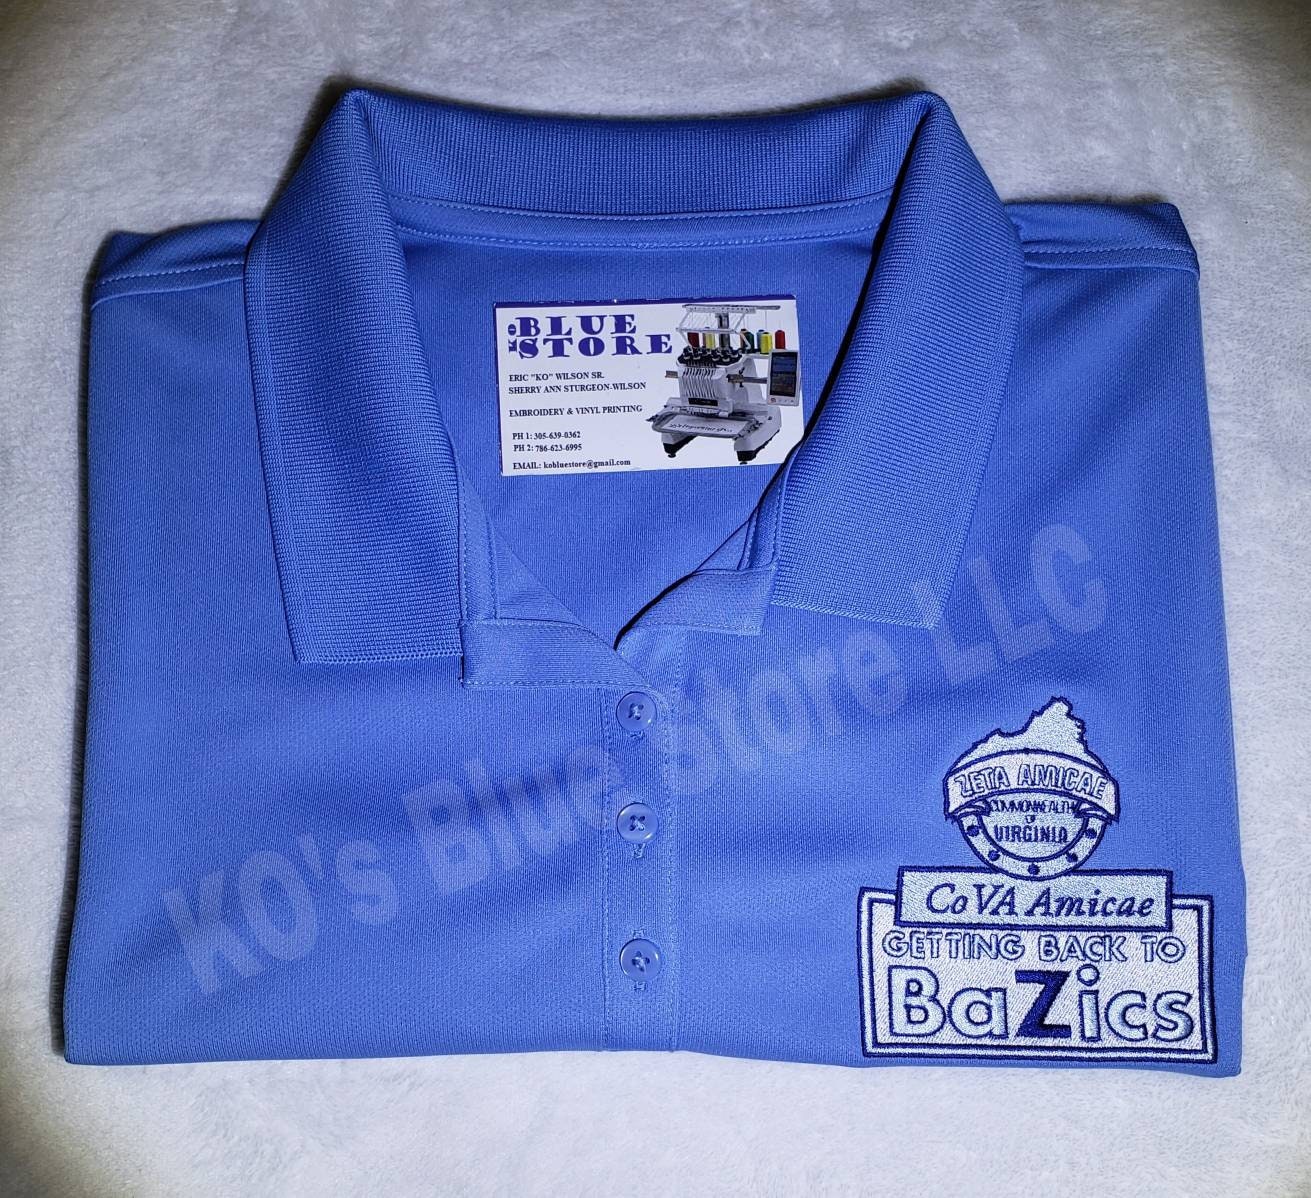 Shop for Embroidered Custom Blue Polo Shirts